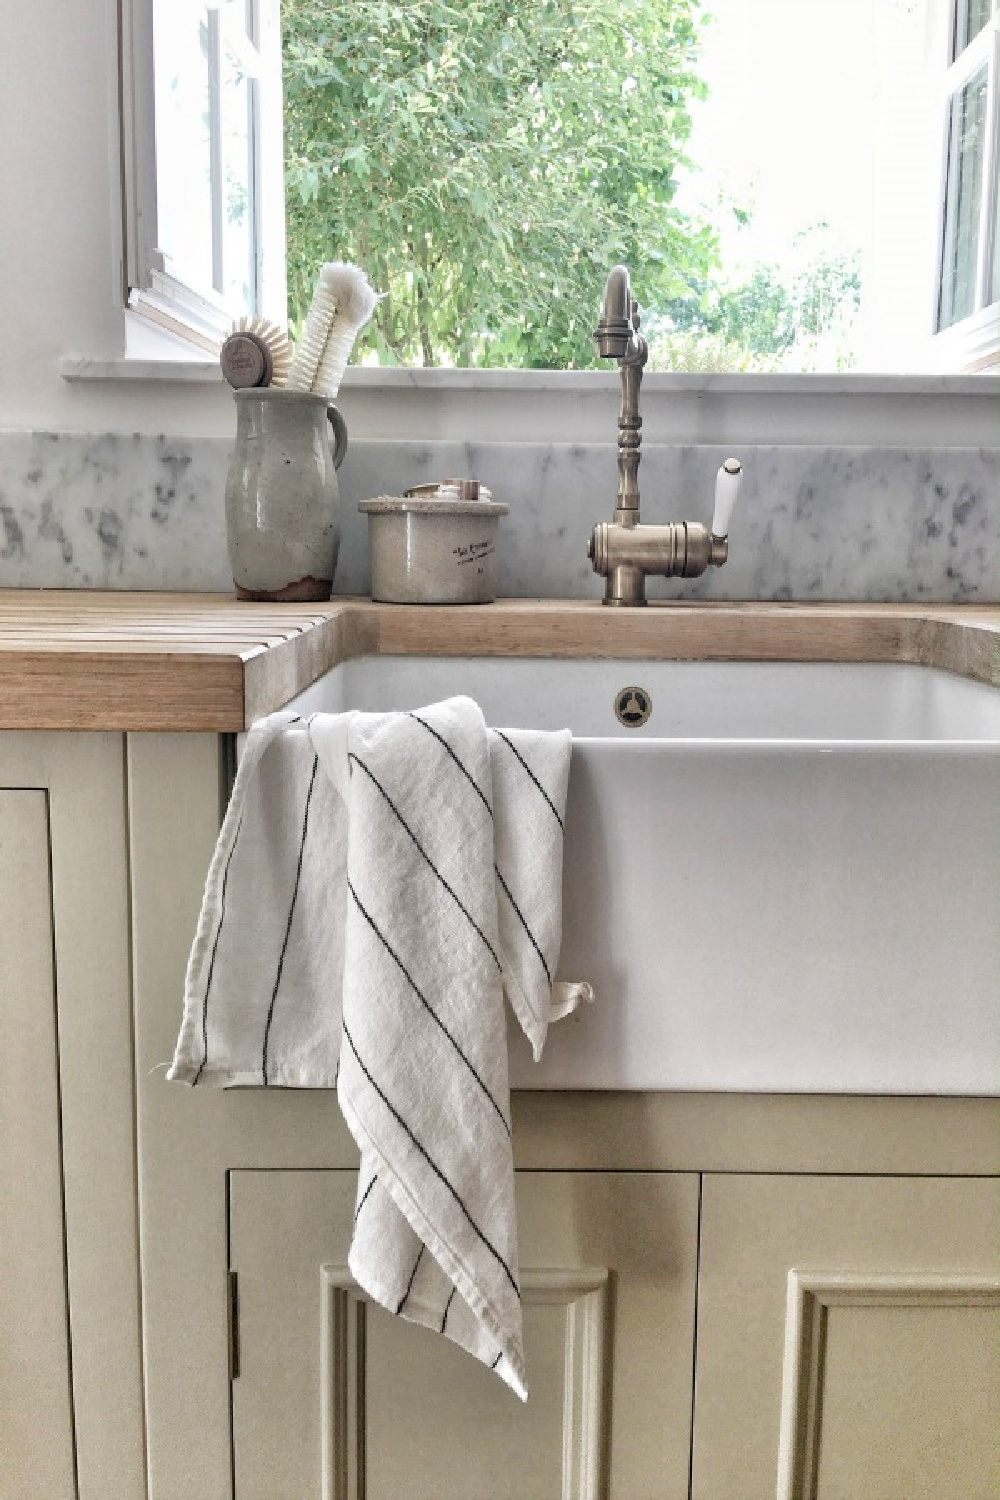 Farm sink in a French country kitchen with putty cabinets - Vivi et Margot.